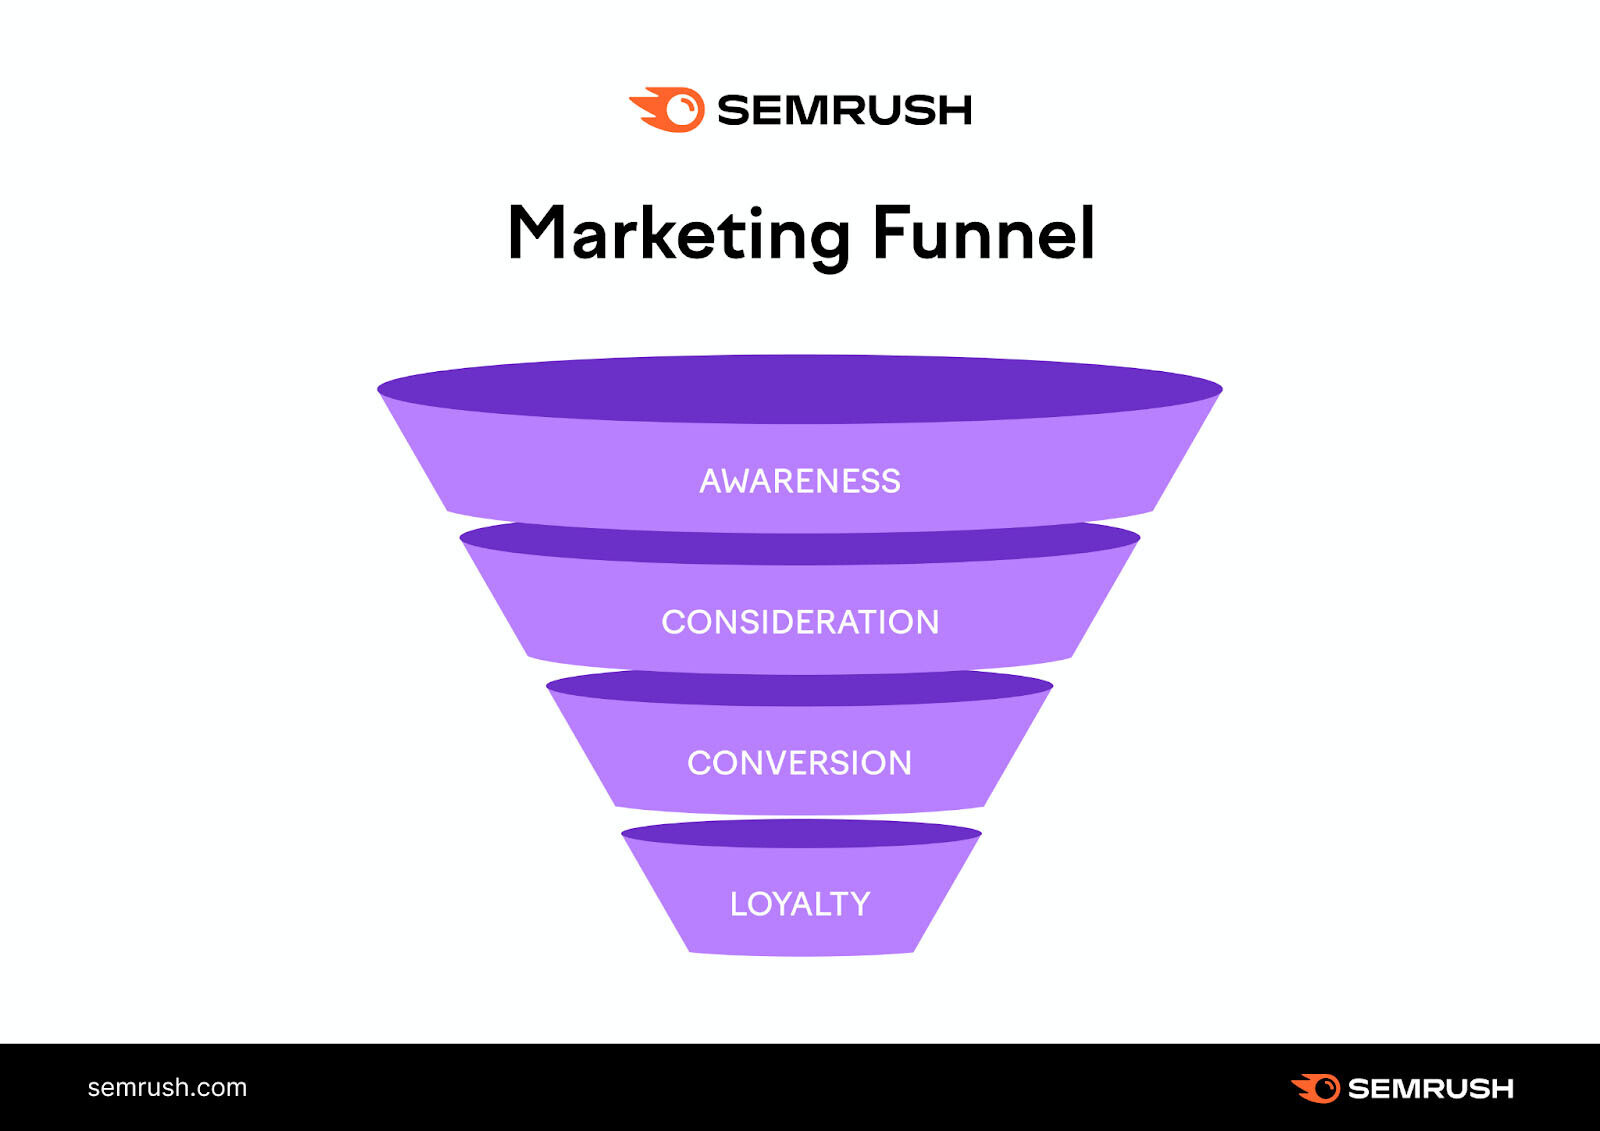 infographic showing "marketing funnel" by Semrush